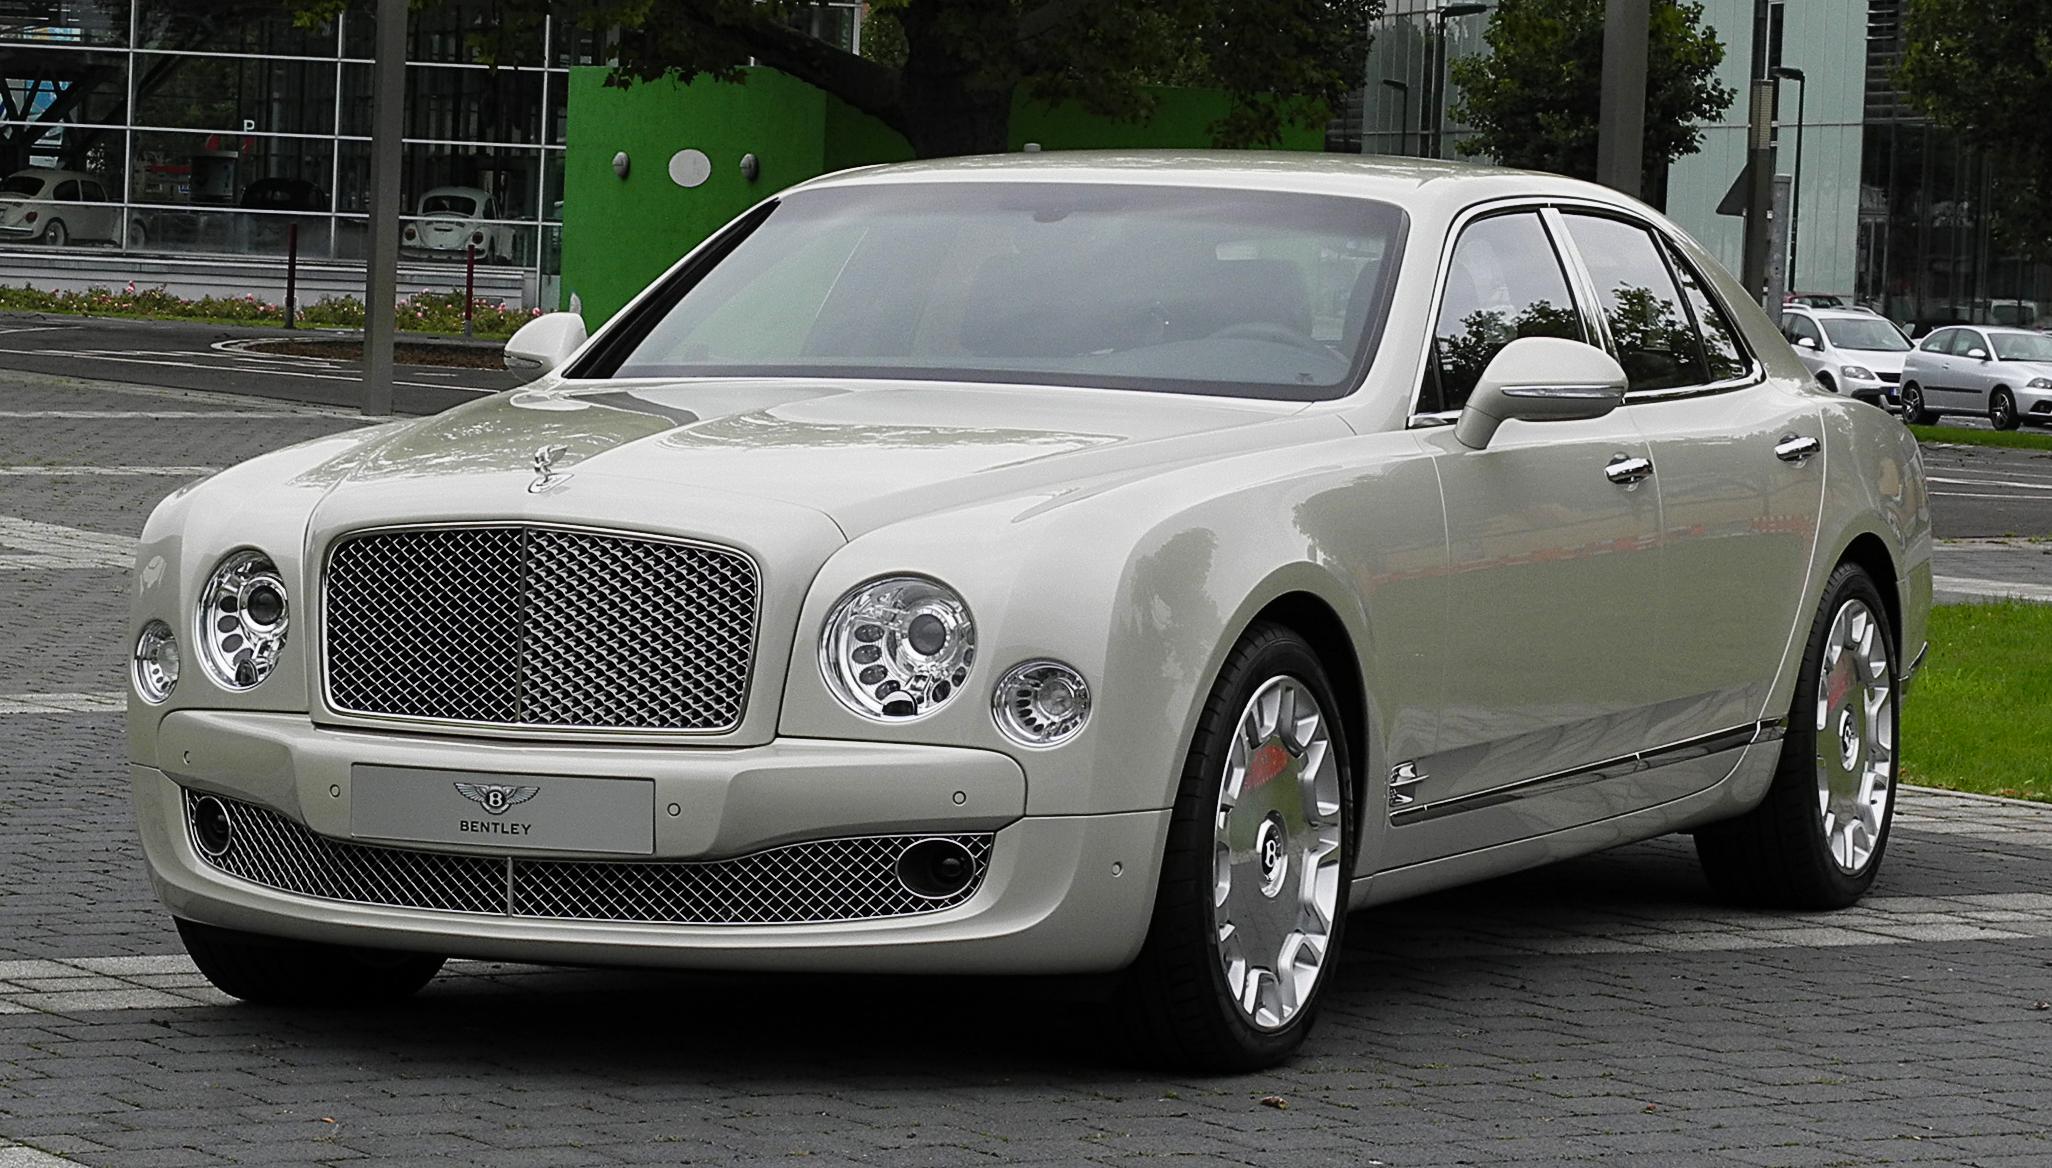 2024 Bentley Edition 8 models signal time’s up for the gas-only V8